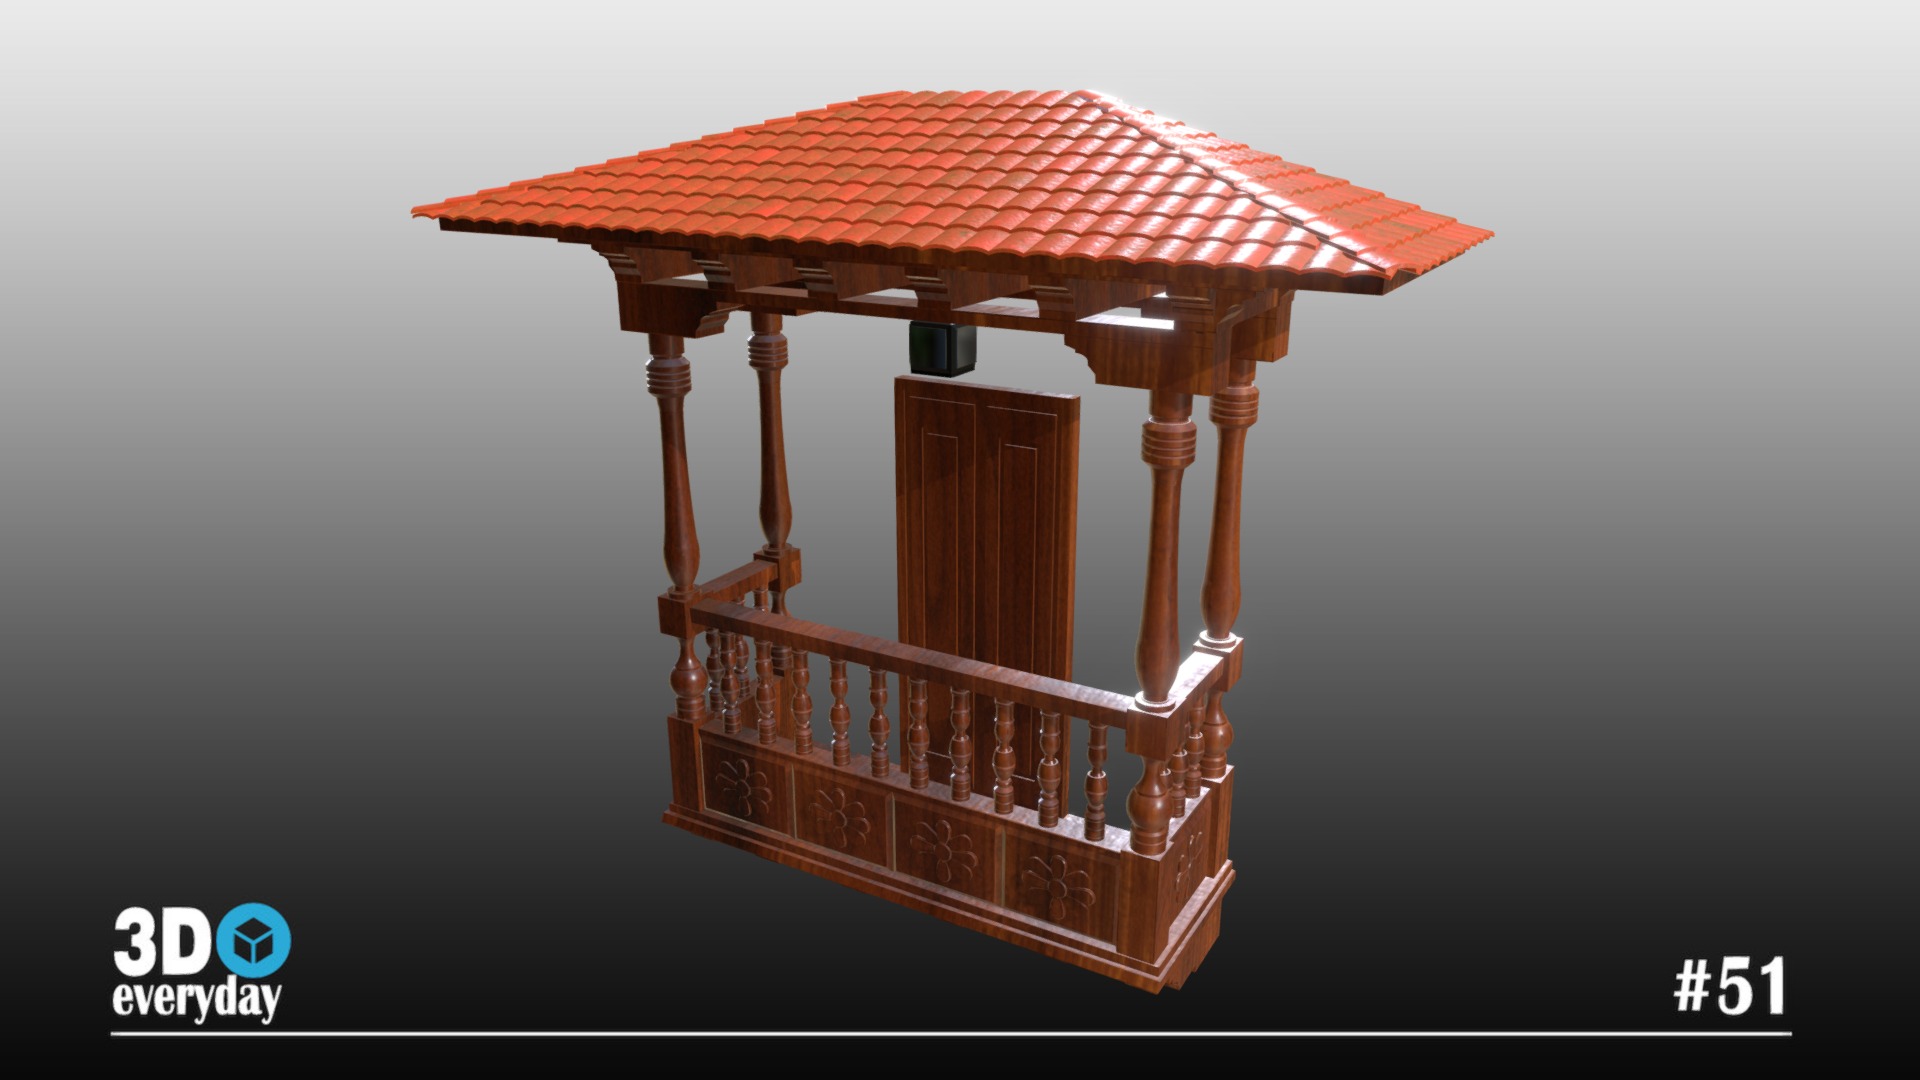 3D model Day#51: Canary balcony - This is a 3D model of the Day#51: Canary balcony. The 3D model is about a wooden structure with a roof.